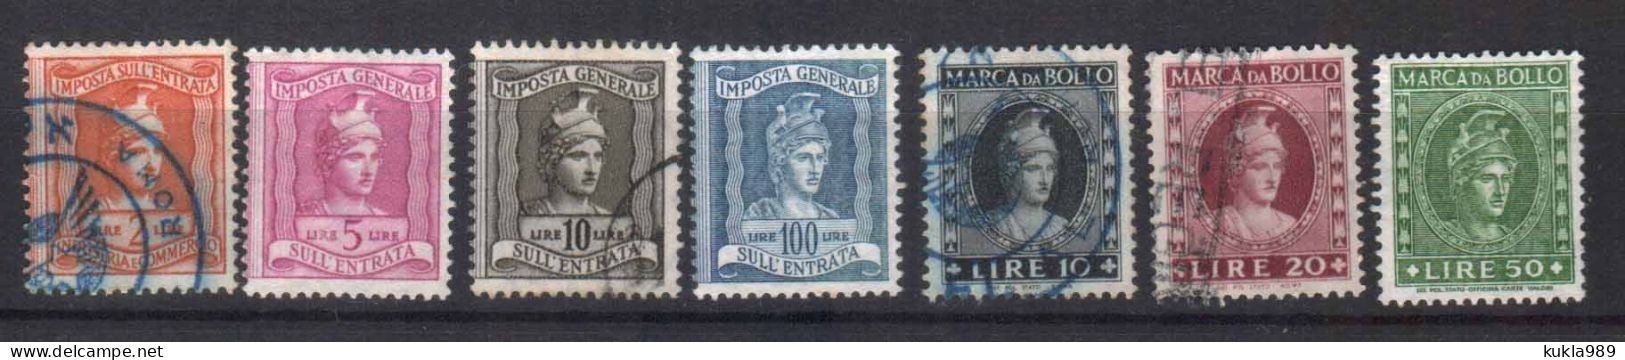 ITALY , C.1950s FISCAL REVENUE TAX 7 STAMPS - Fiscaux